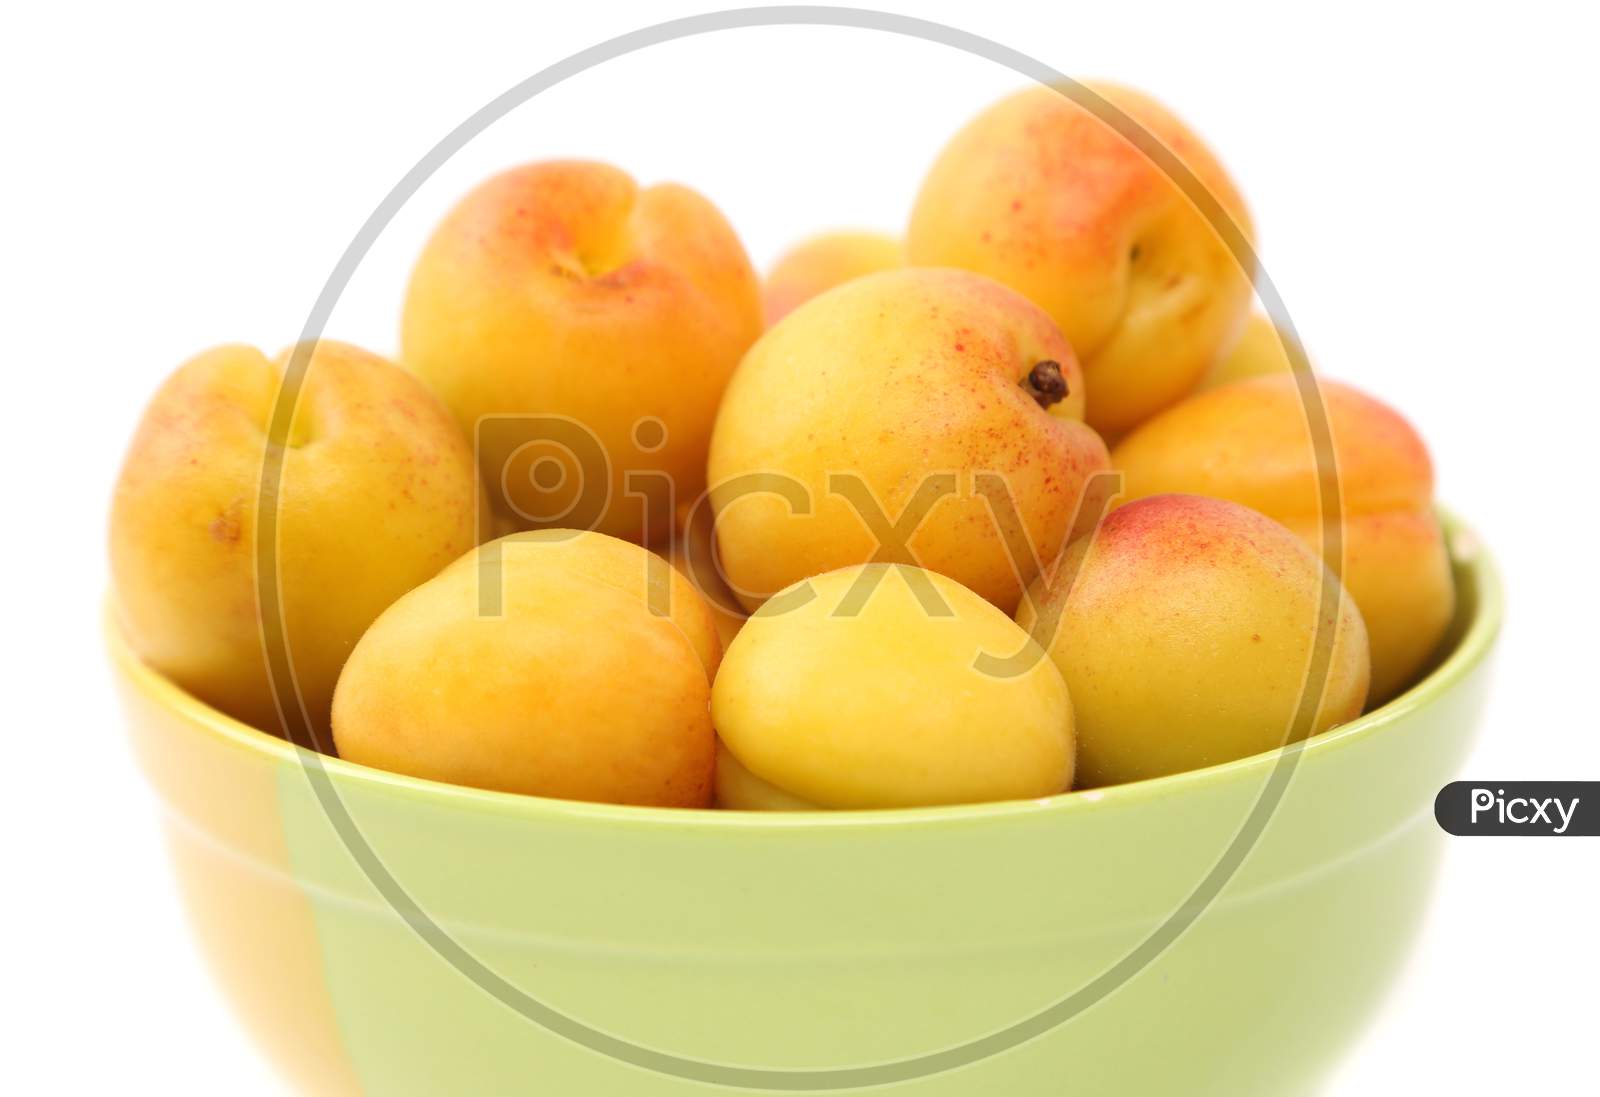 Apricots In A Deep Plate. Isolated On A White Background.